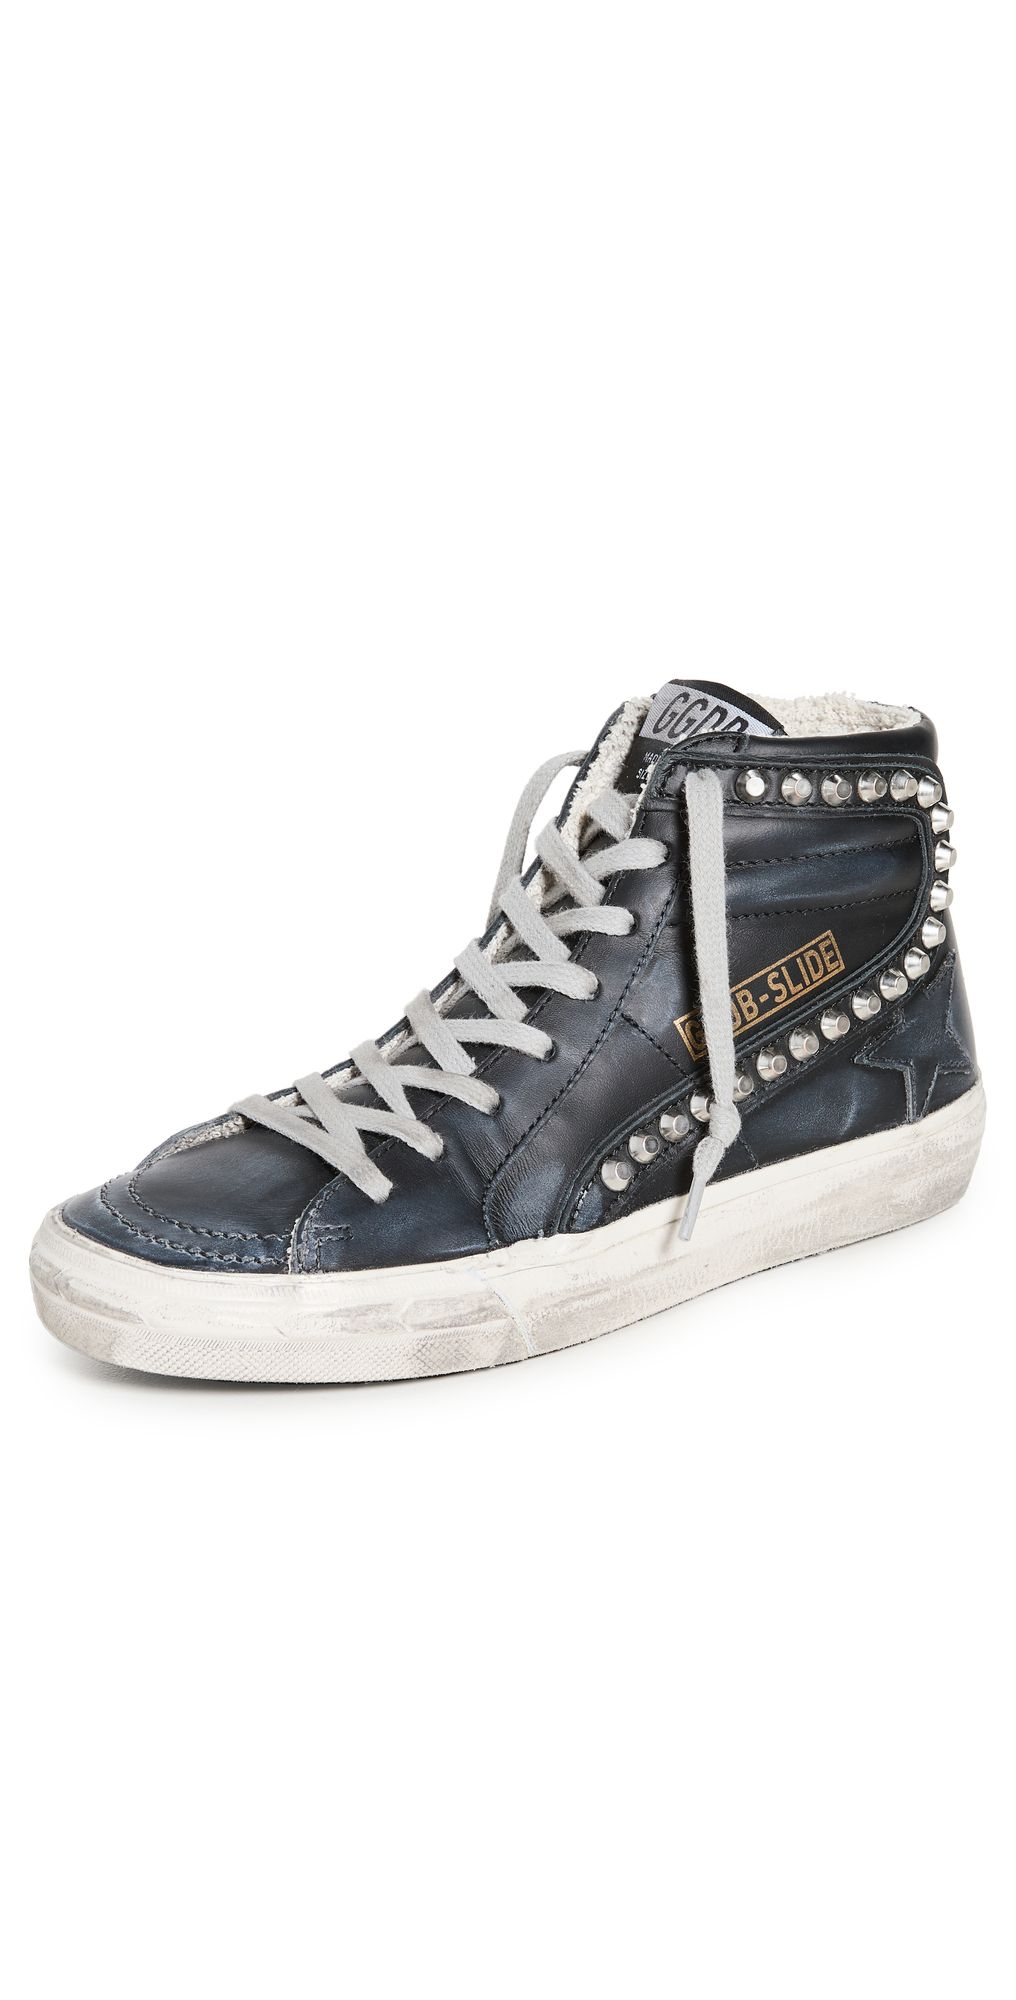 Studded Leather Slide Sneakers | Shopbop